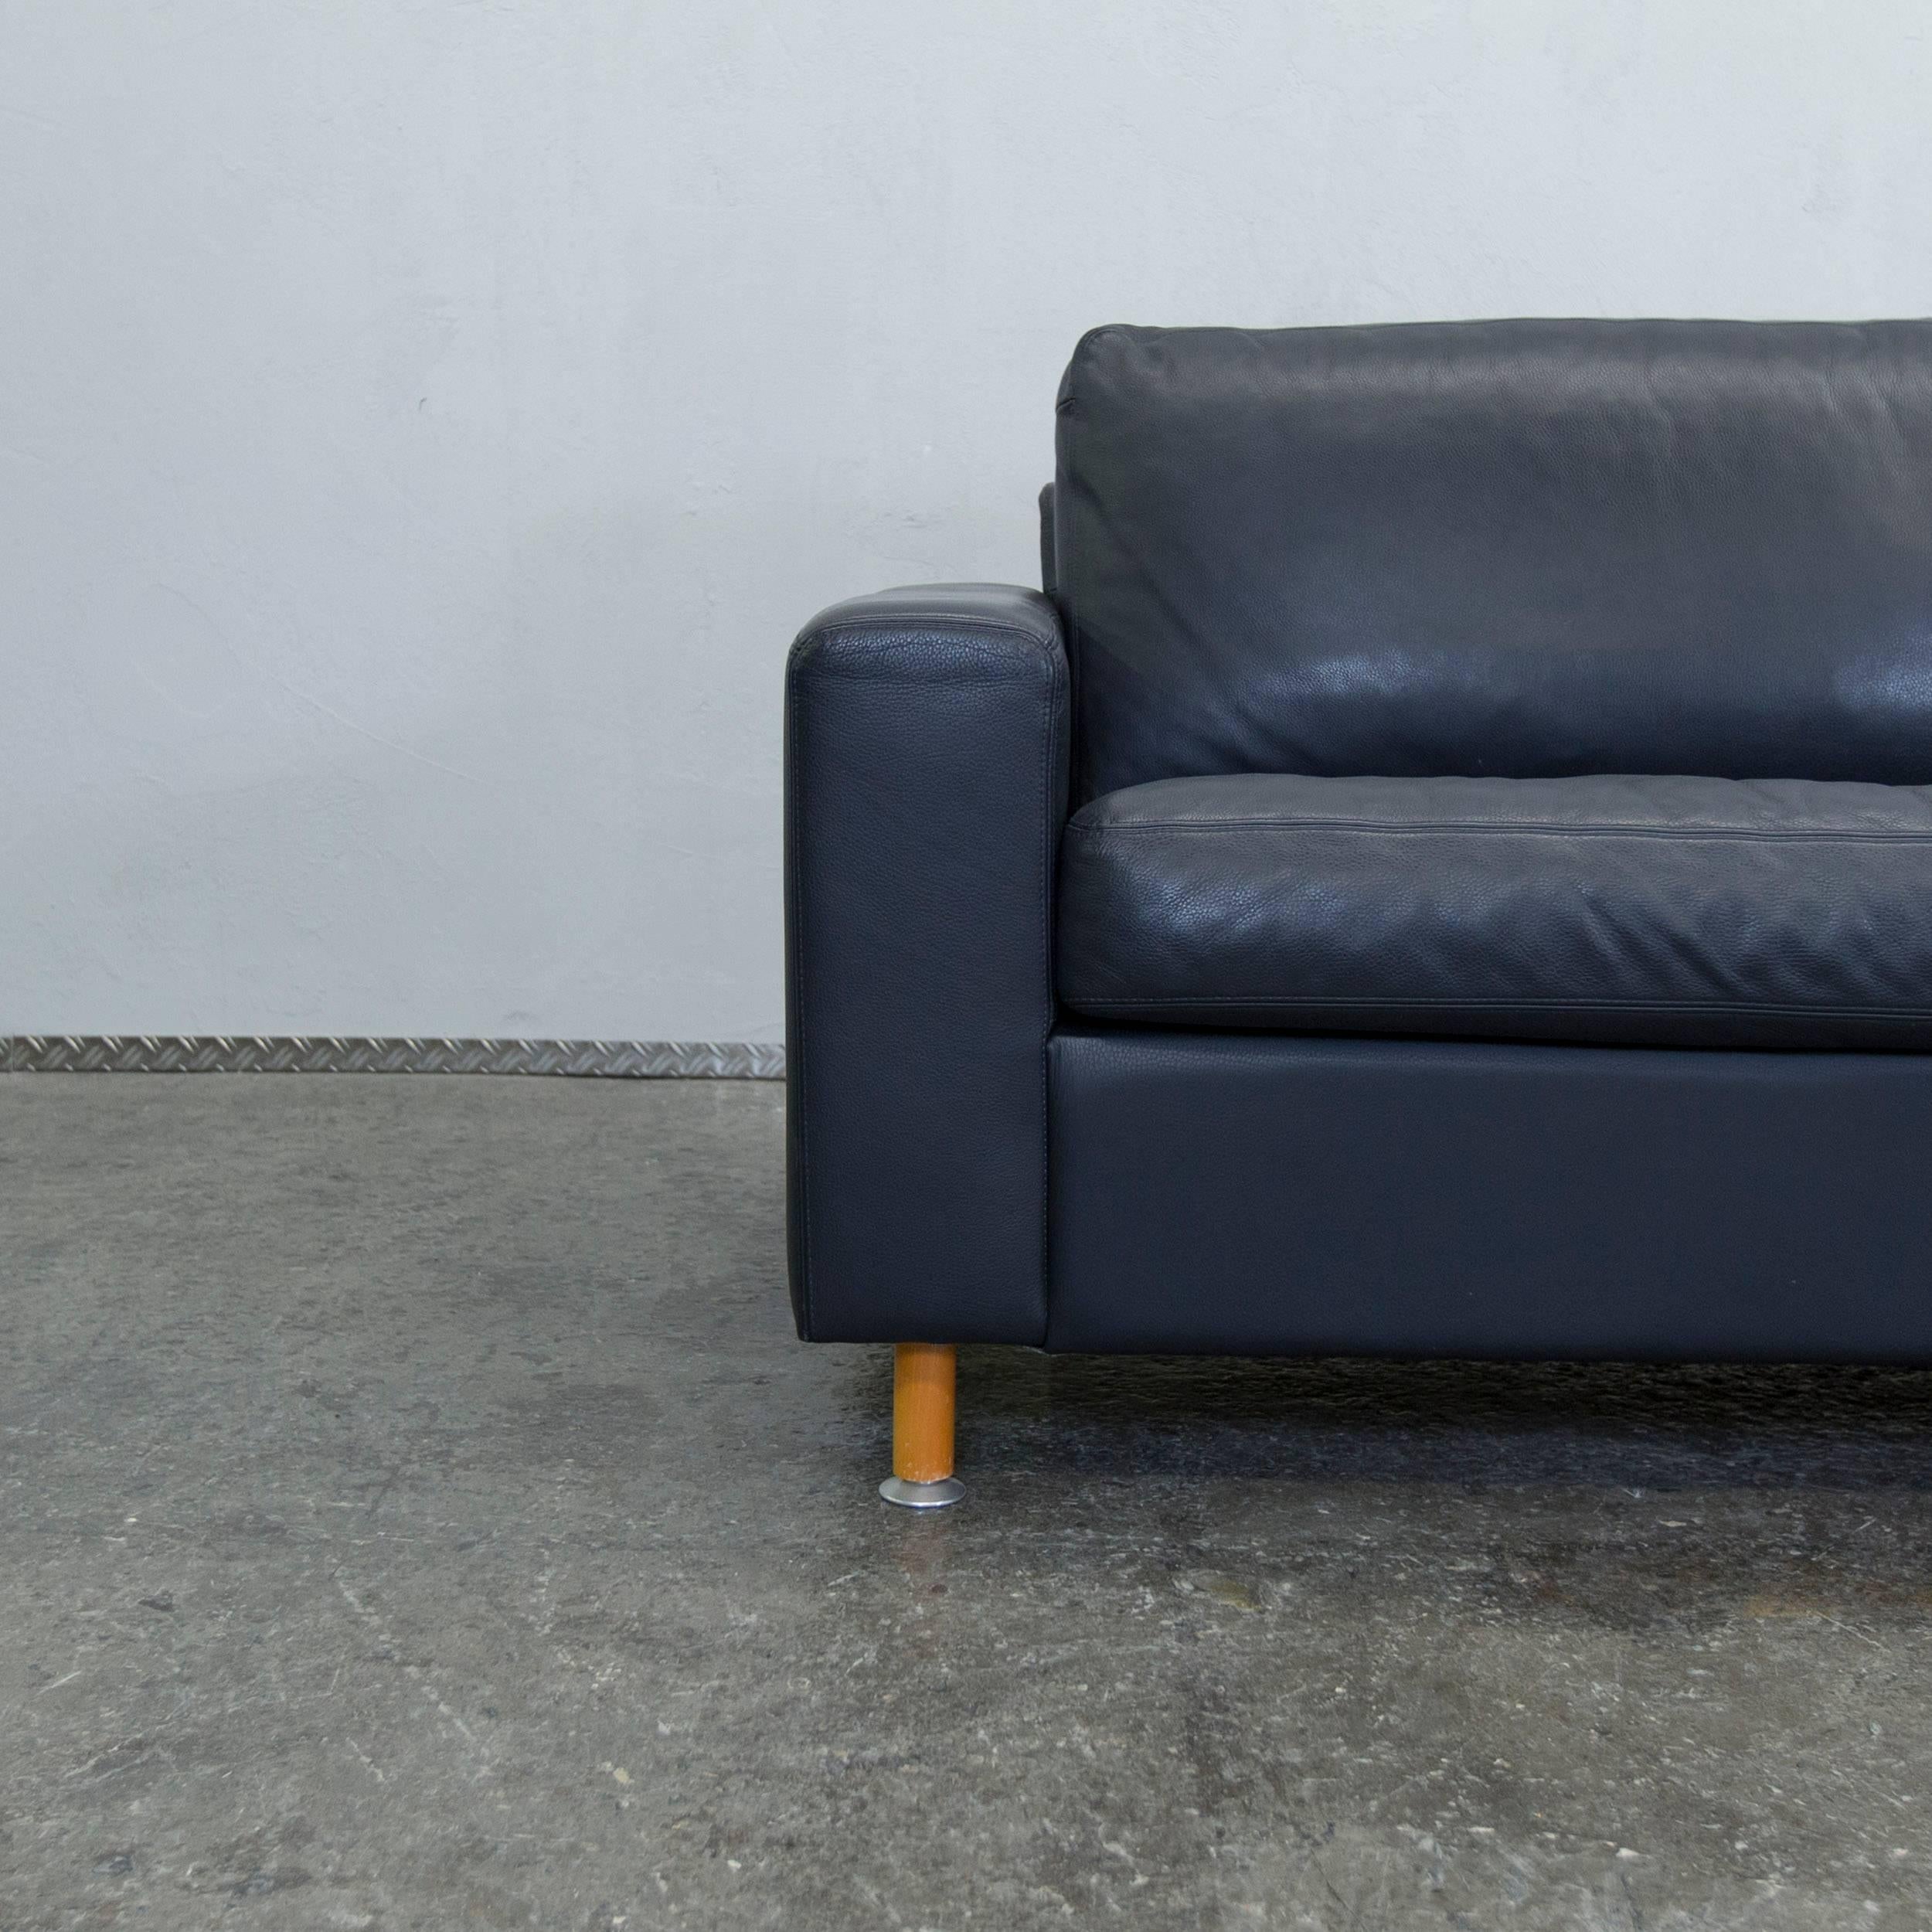 Machalke leather three-seat sofa in dark blue made in Germany. Great accent by brown feet.